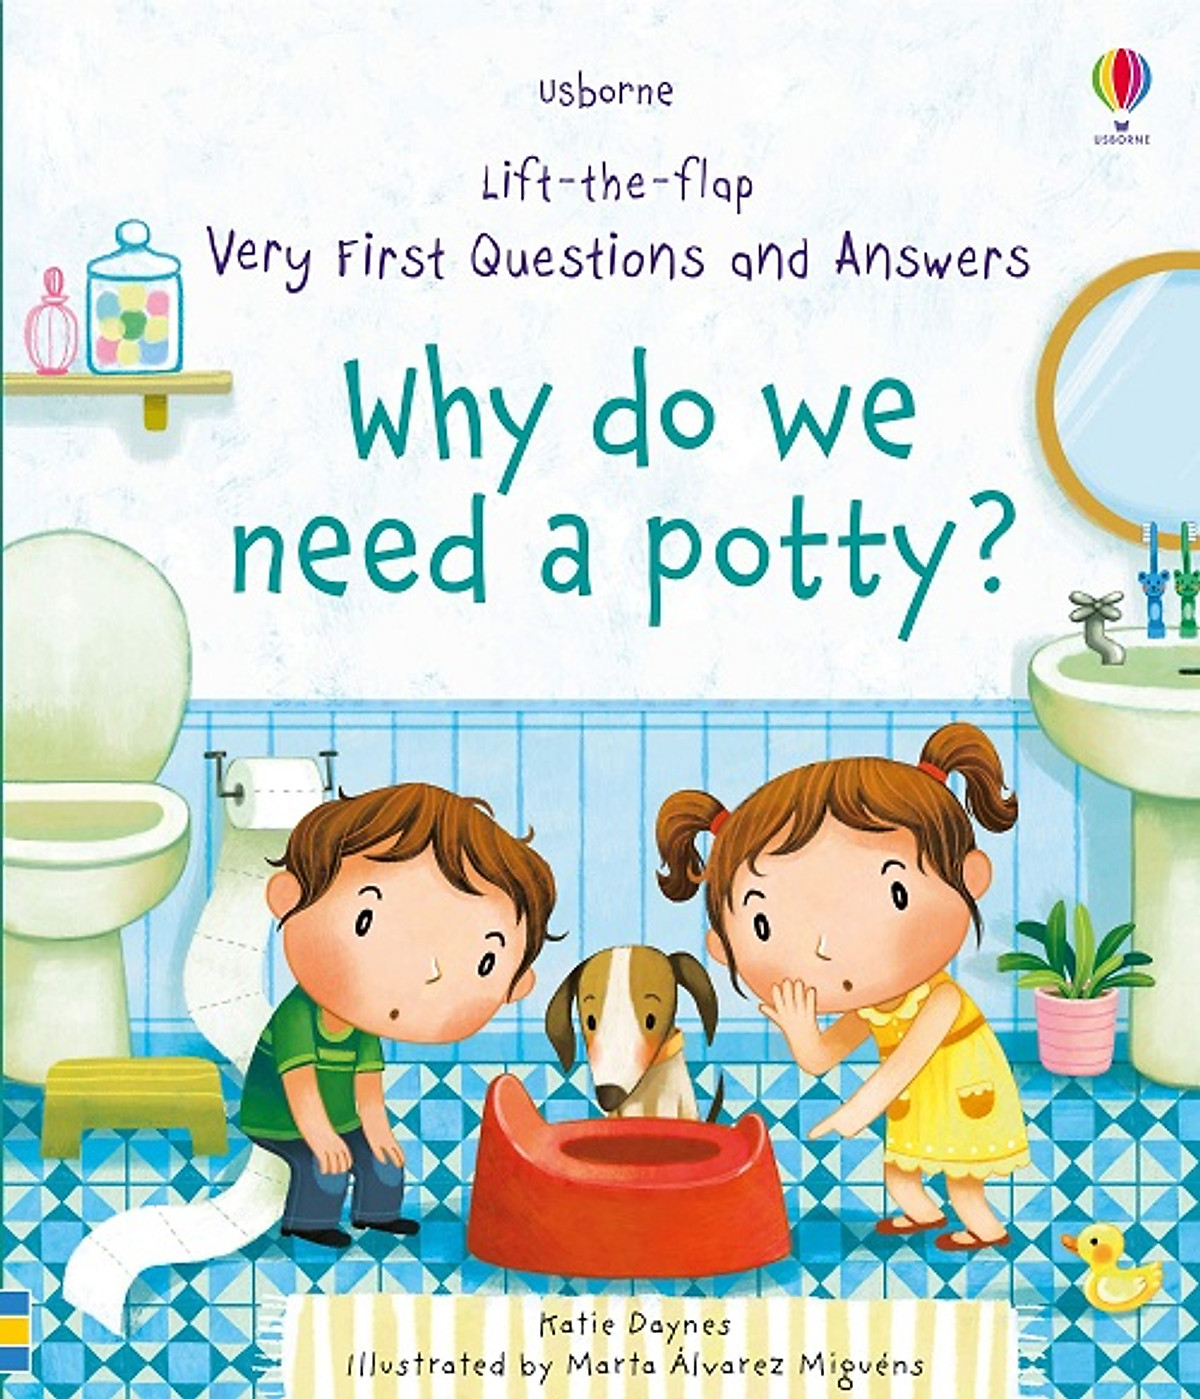 Sách - Anh: Lift The Flap Very First Q&A Why do we need a potty?